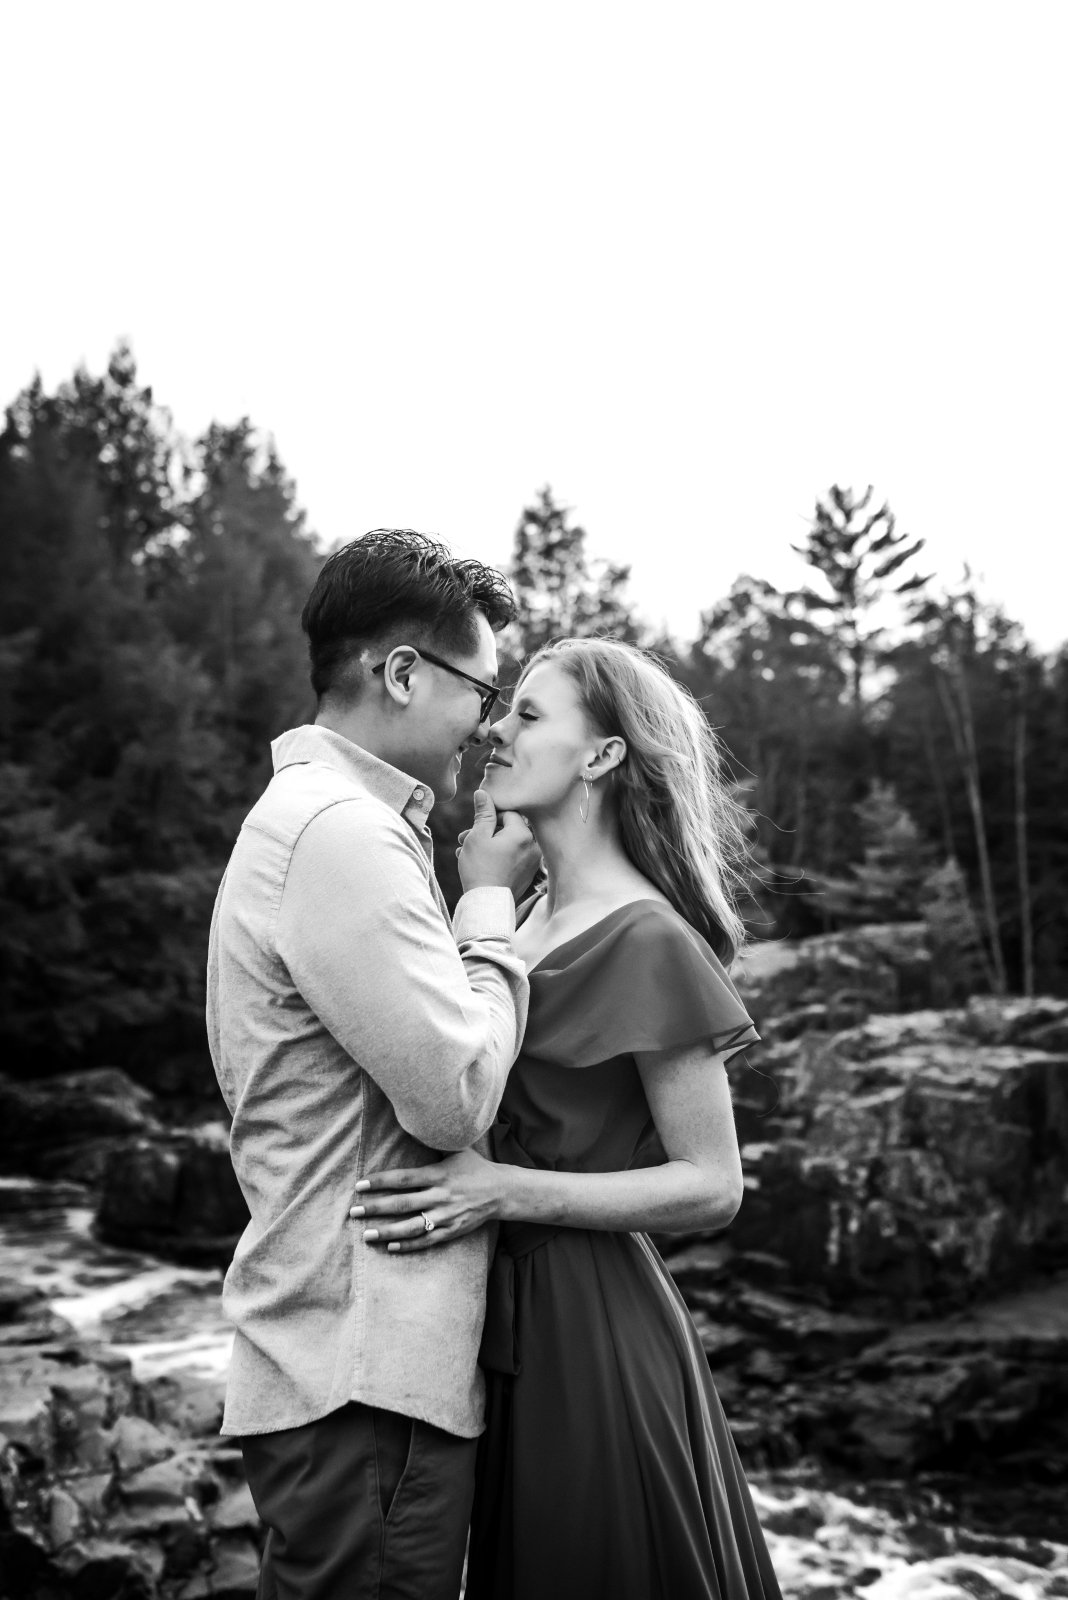 engagement, Wisconsin engagement Photographer, Wausau, Green Bay, Milwaukee, Madison, Minocqua, Door County, What to Wear Photos, unique engagement photos